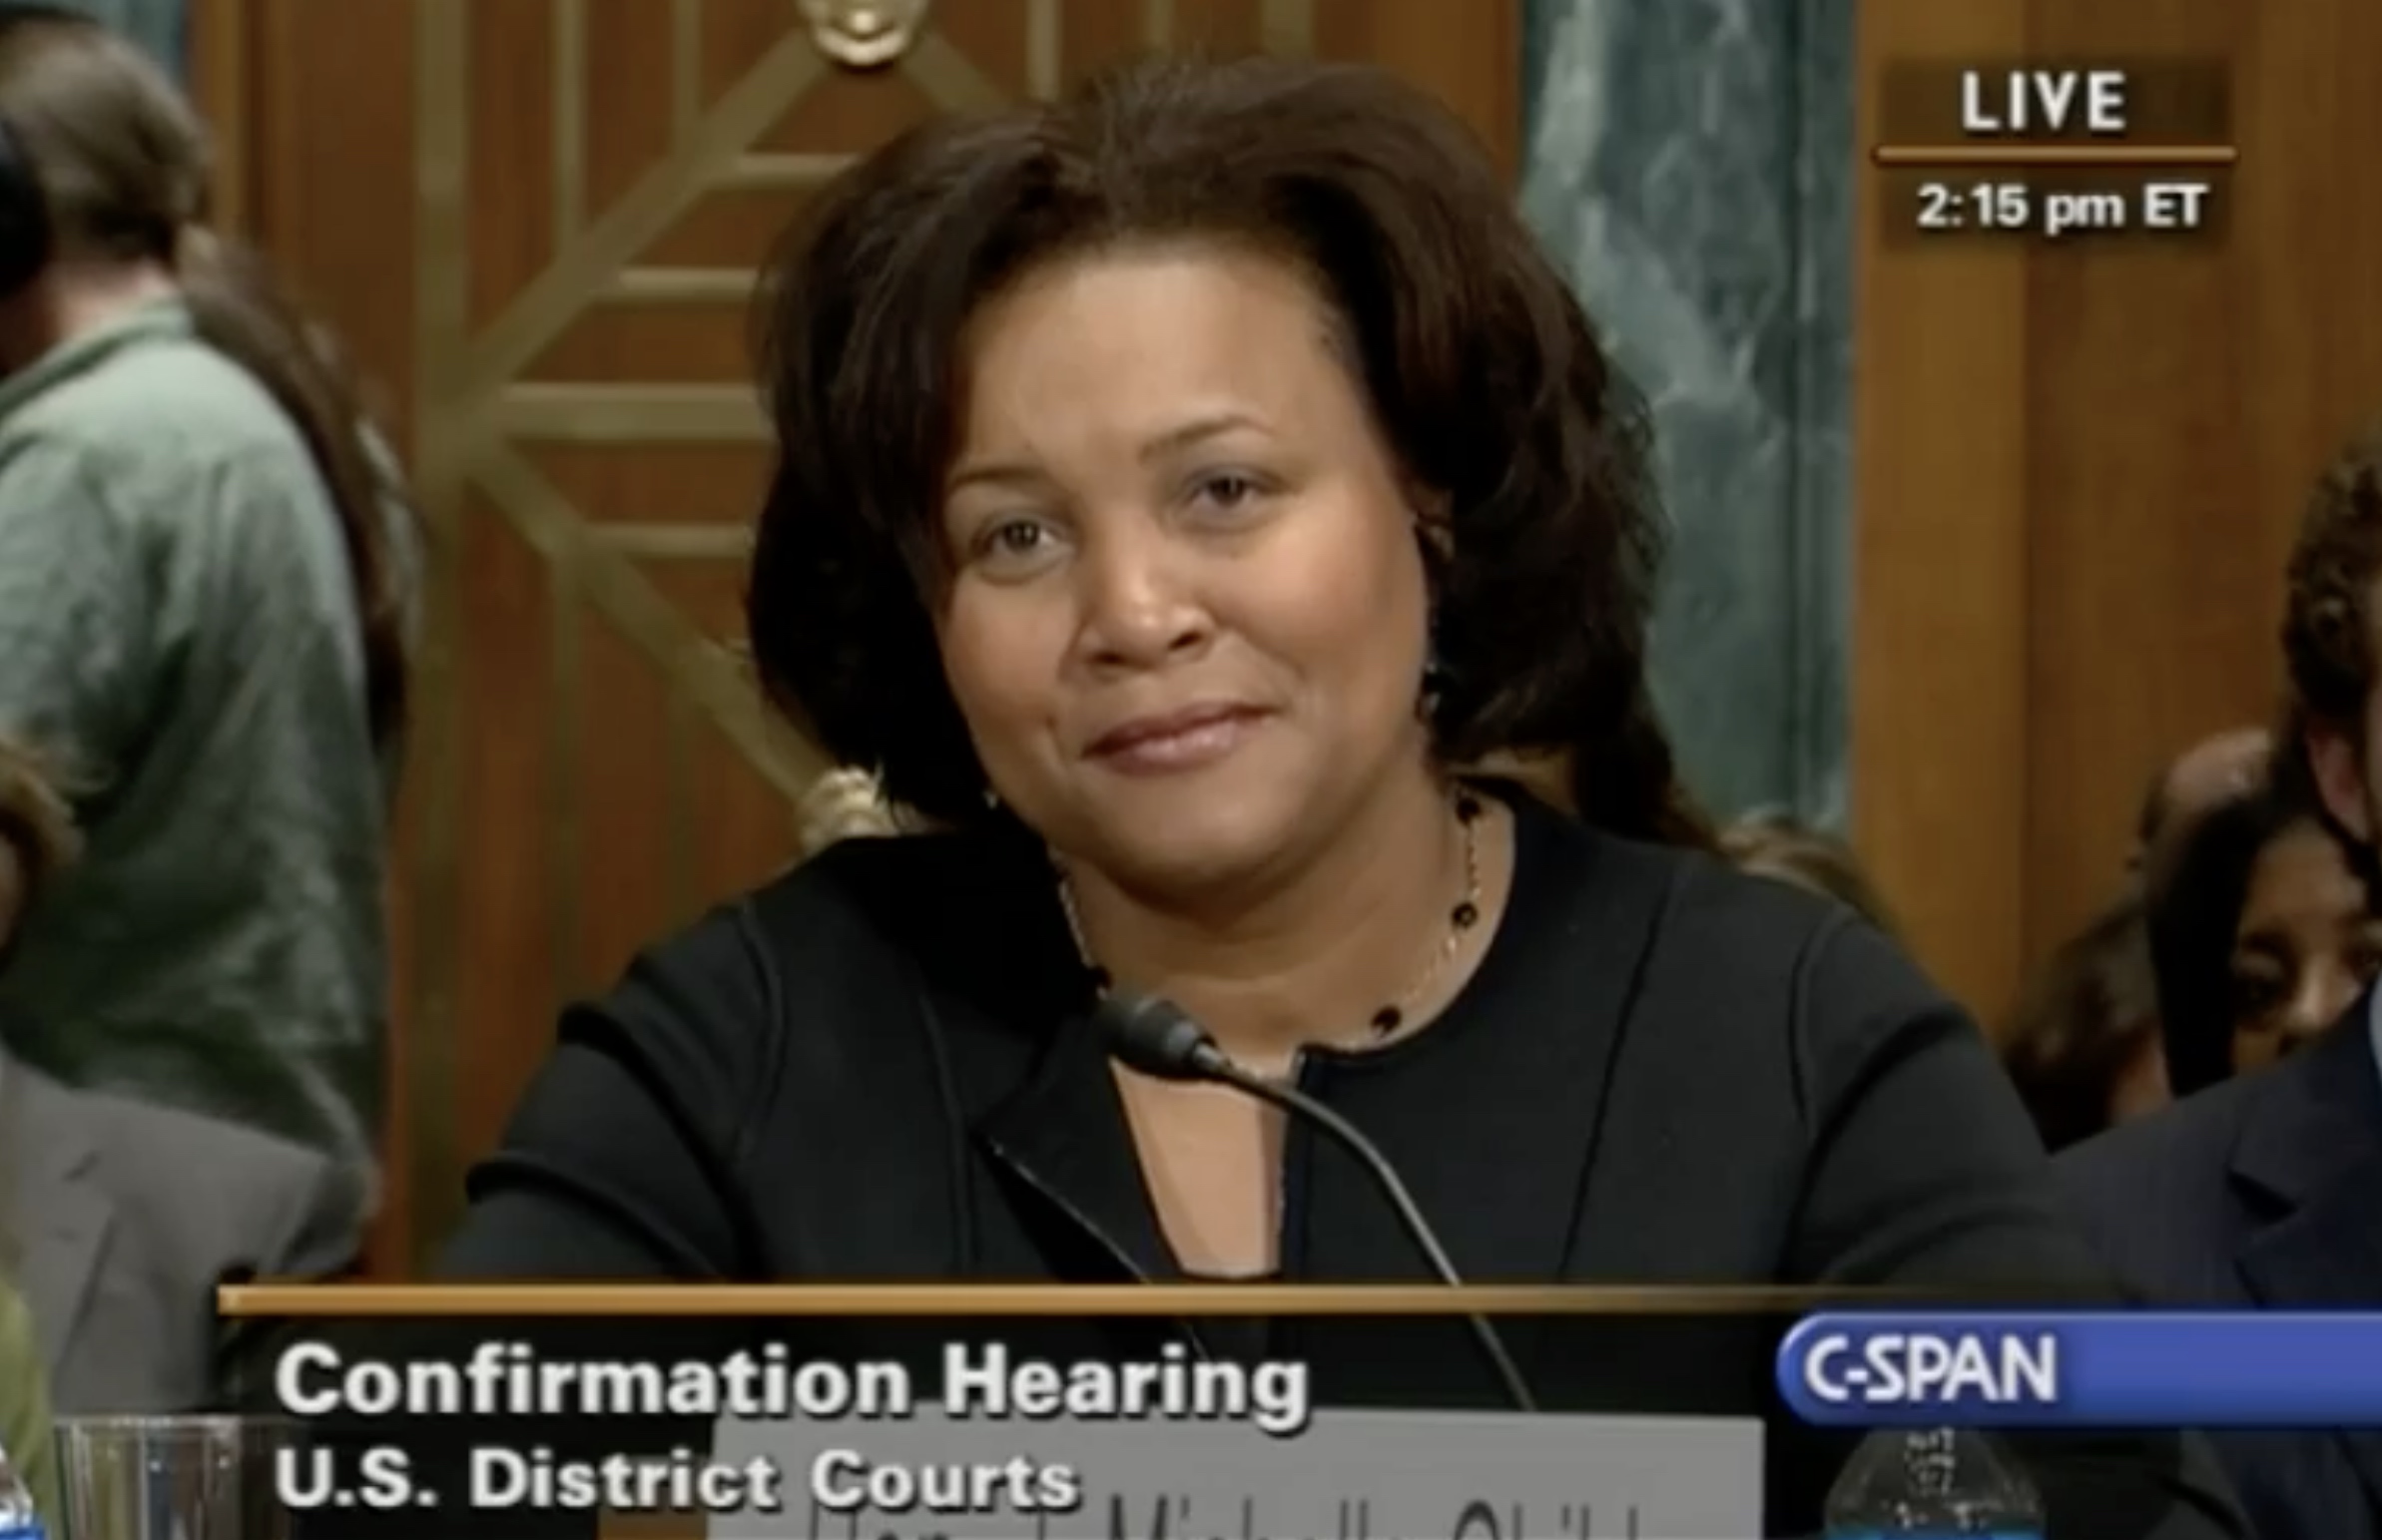 woman speaking at microphone in congressional hearing room